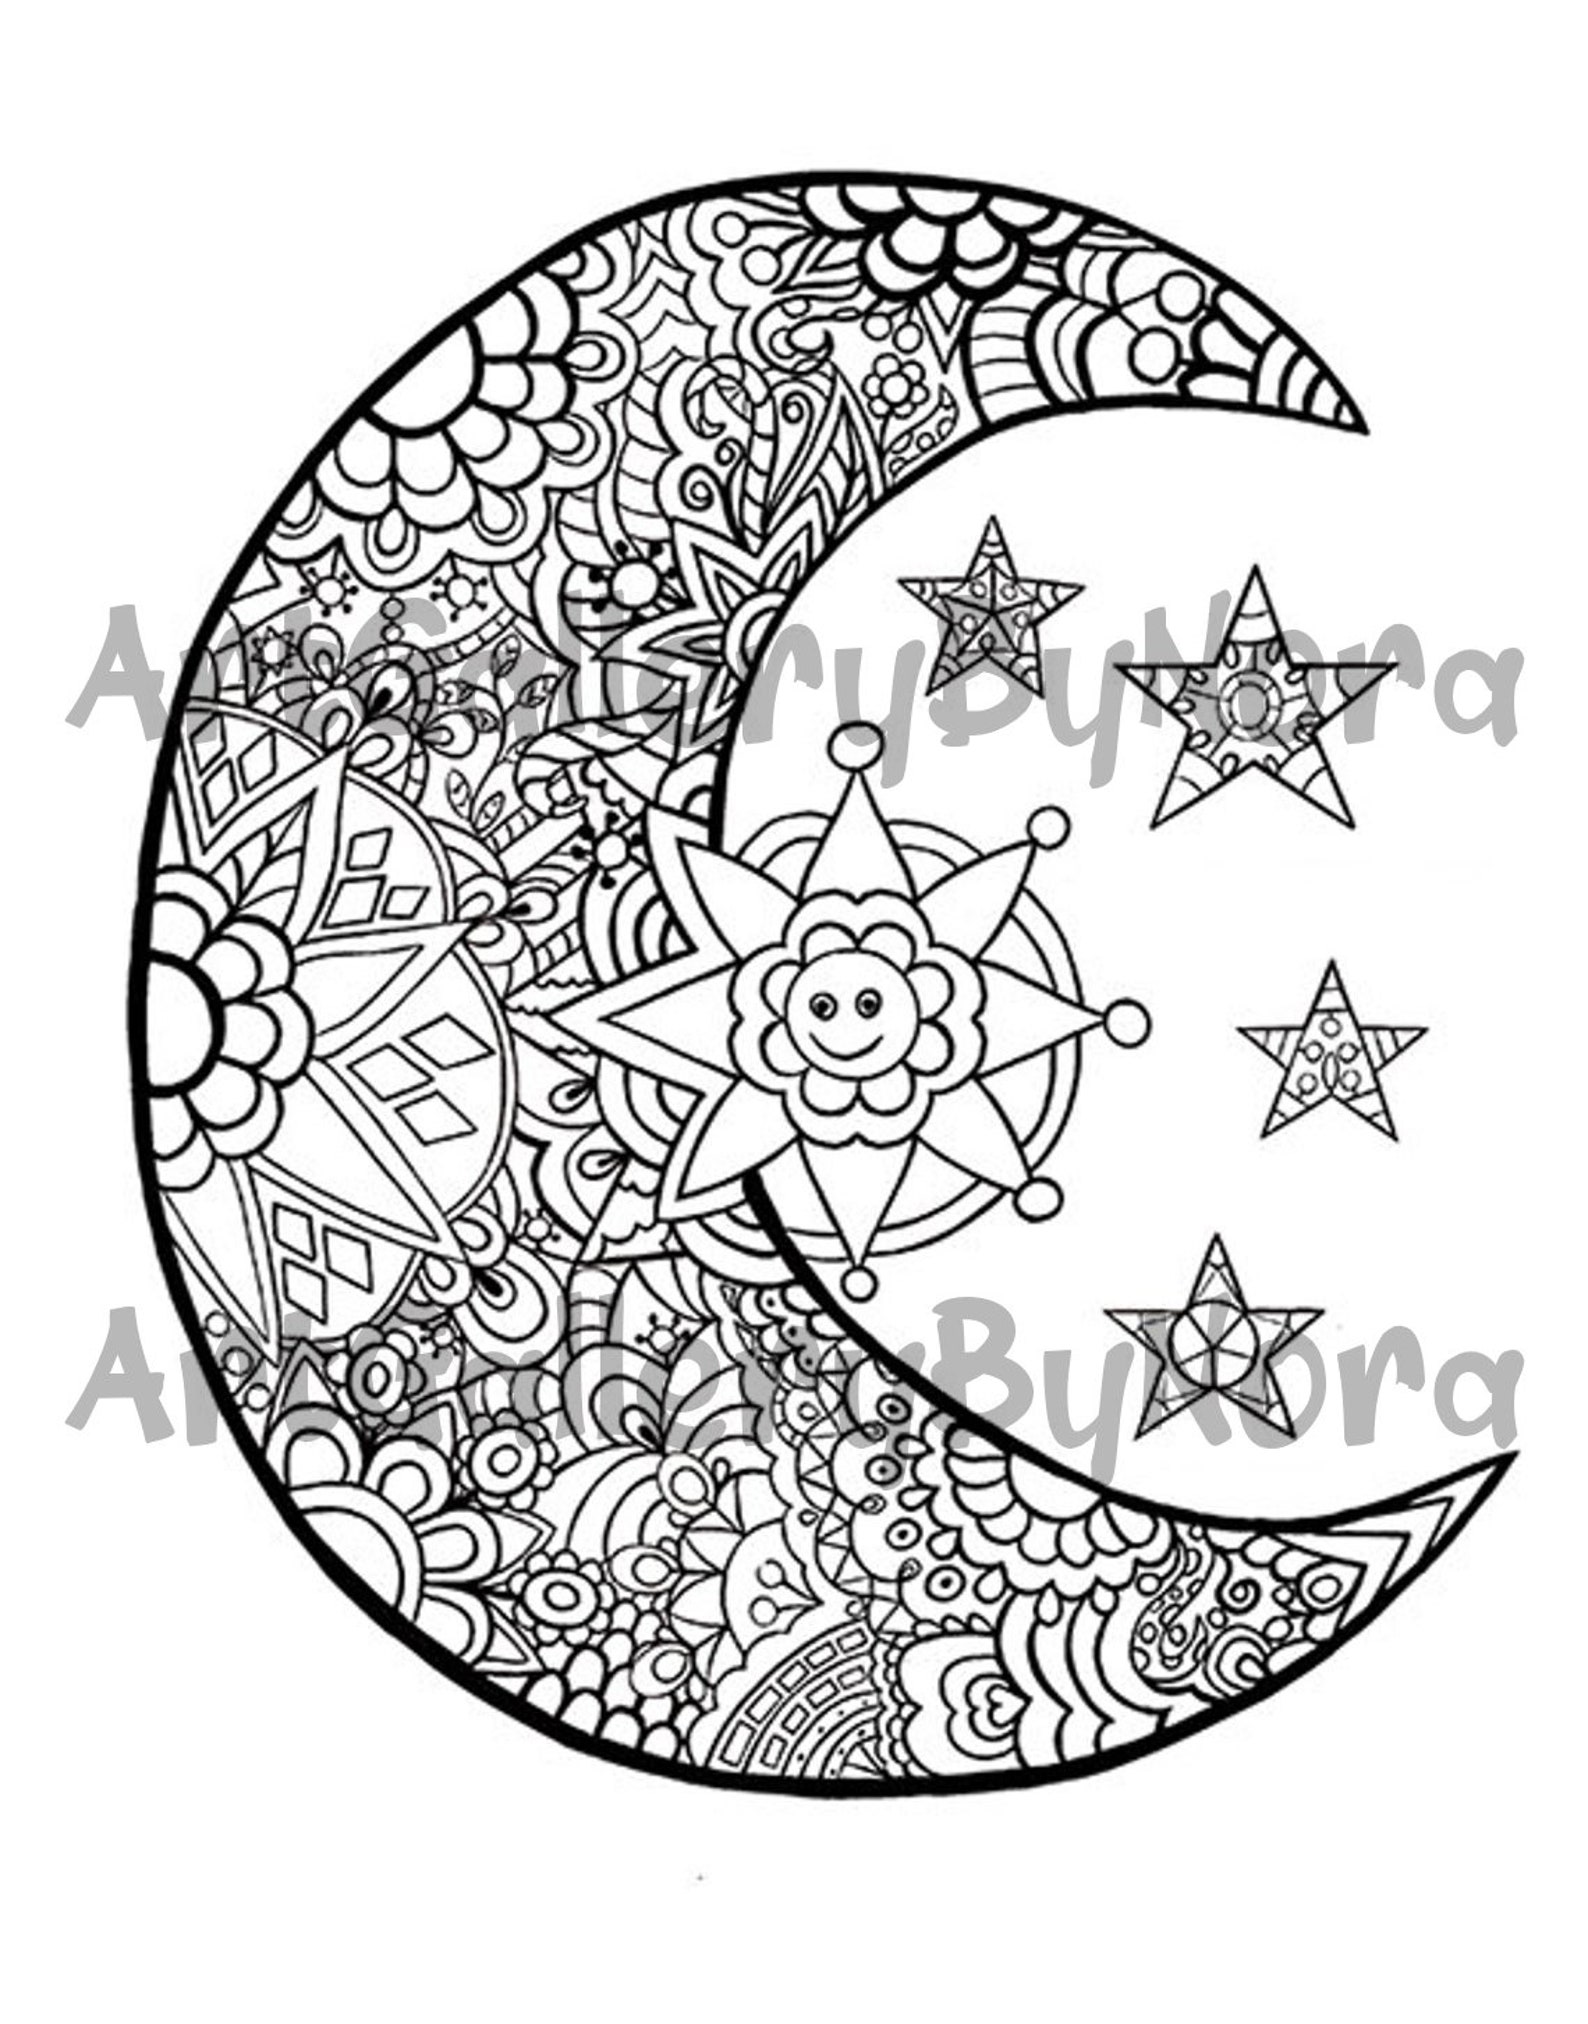 Moon Printable Adult Coloring Page Coloring pages for adults | Etsy